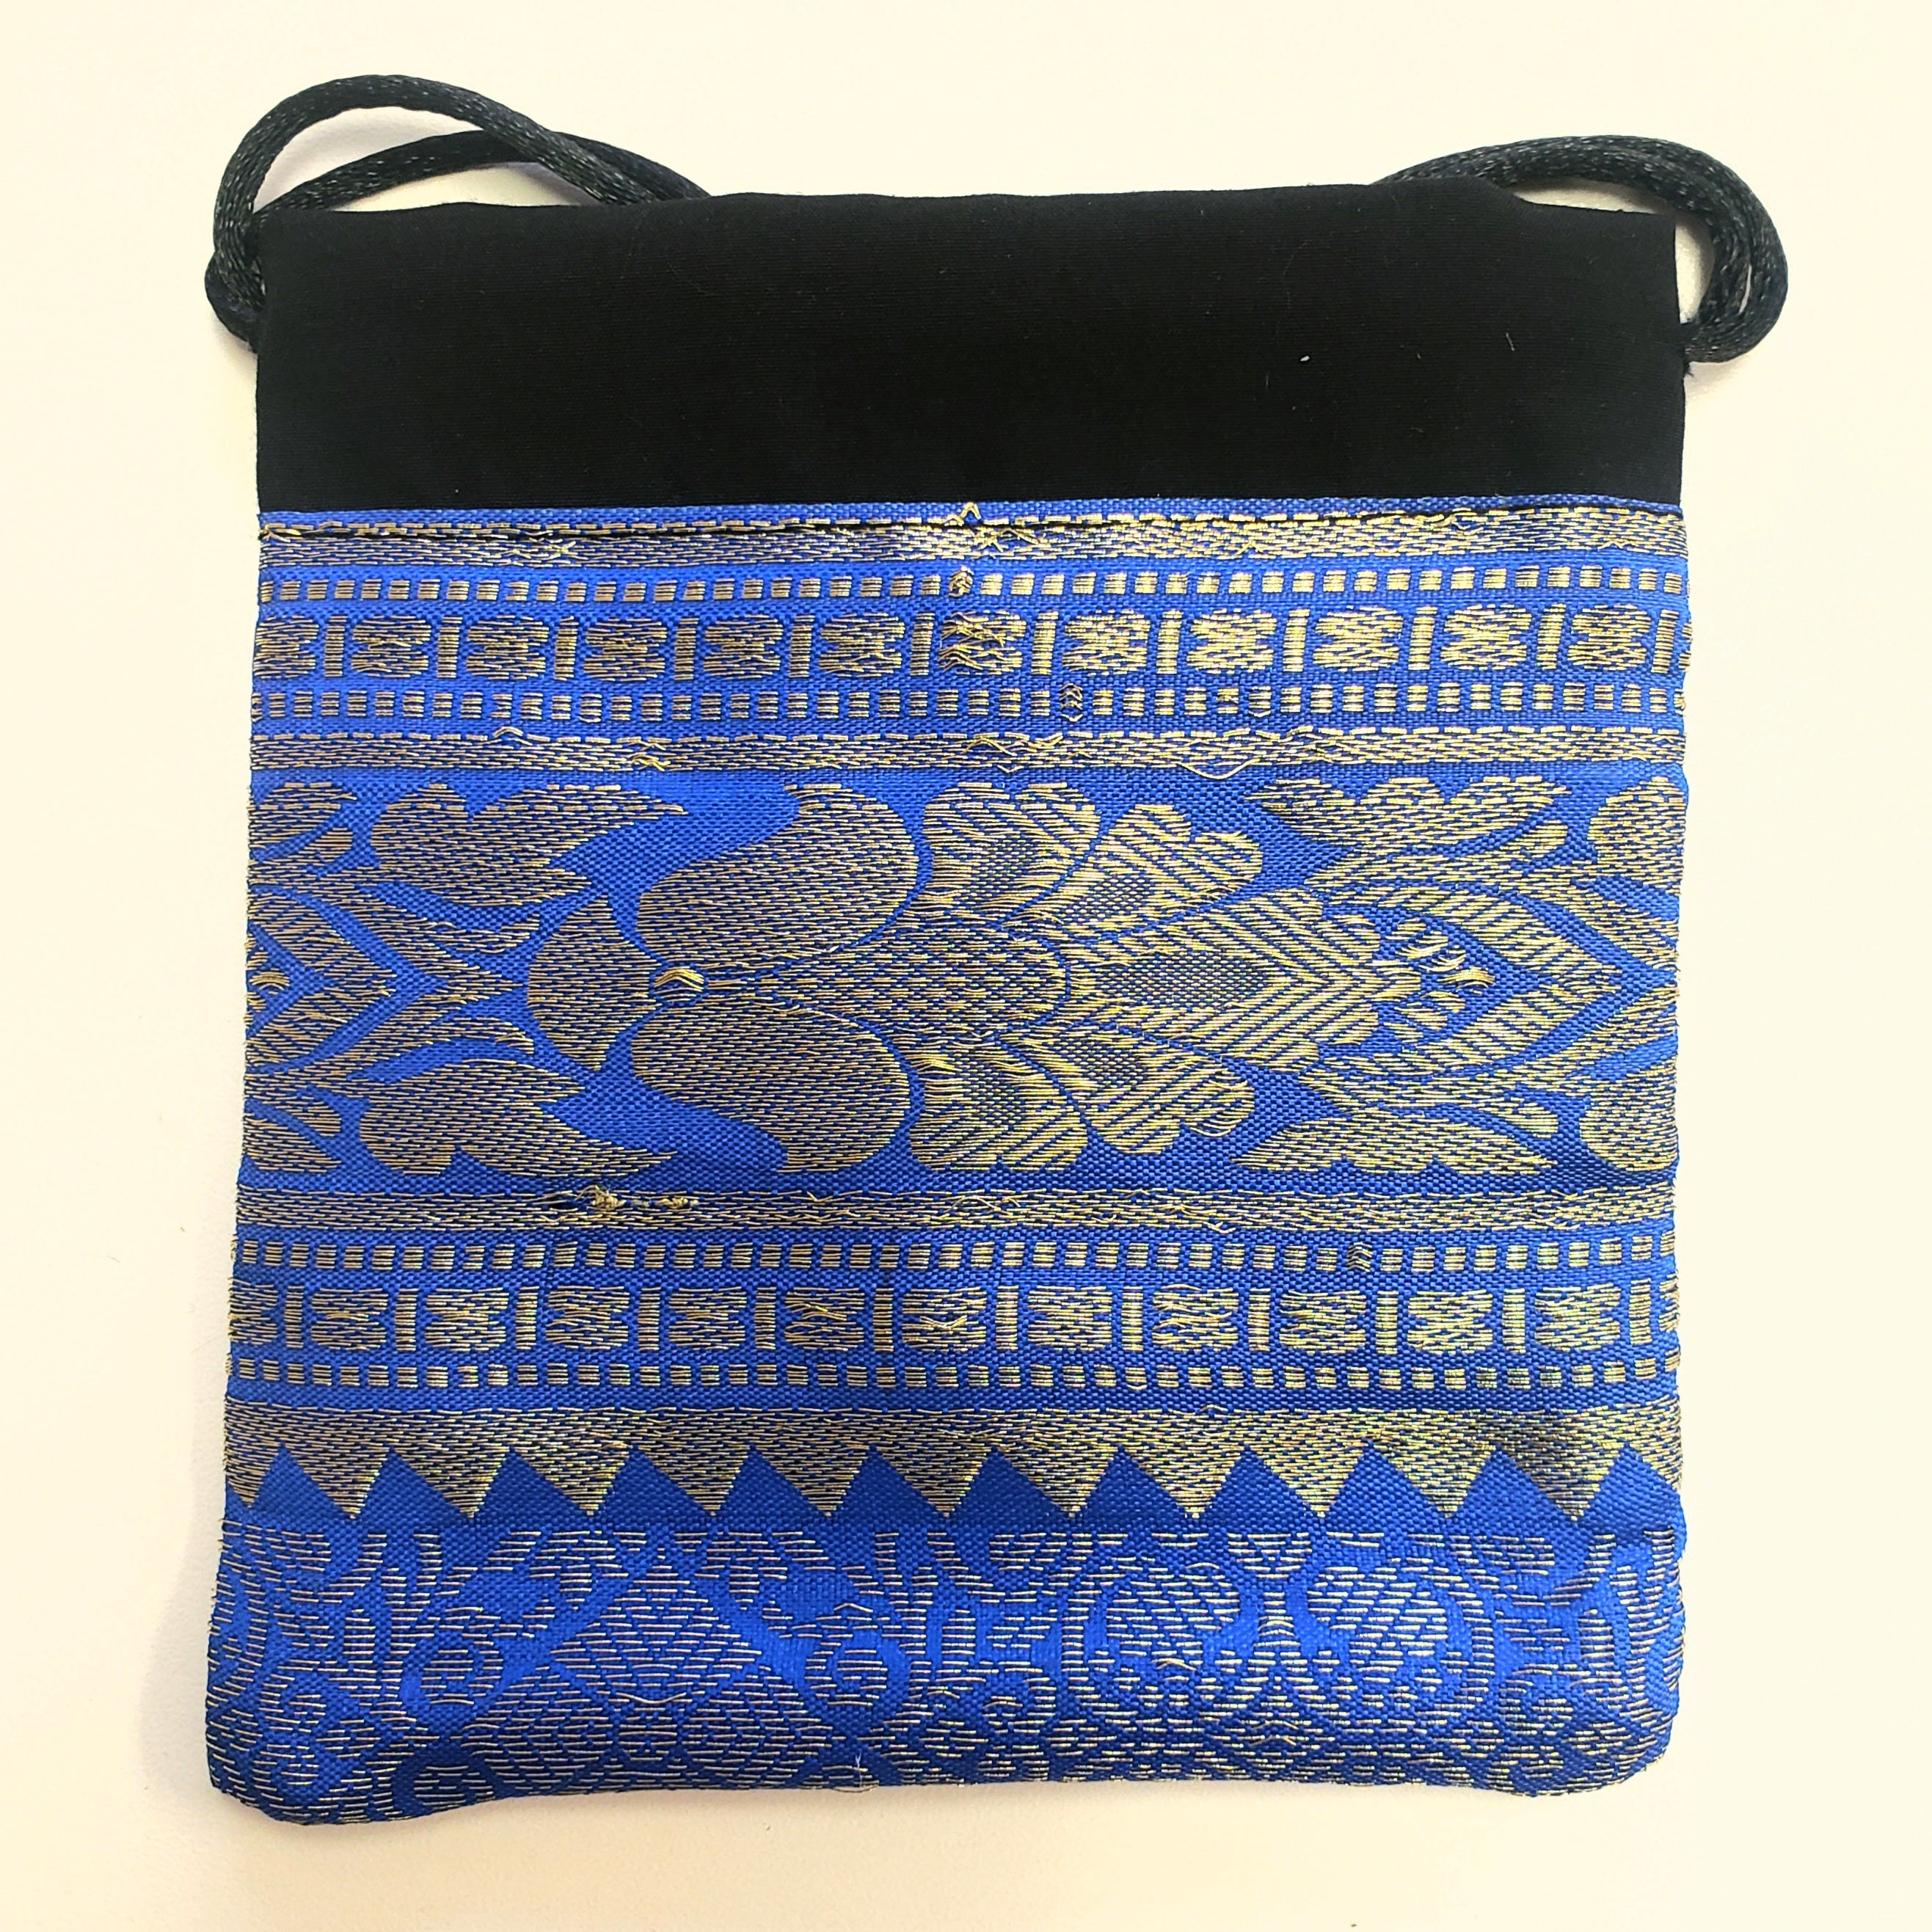 Recycled Sari Fabric Pouch